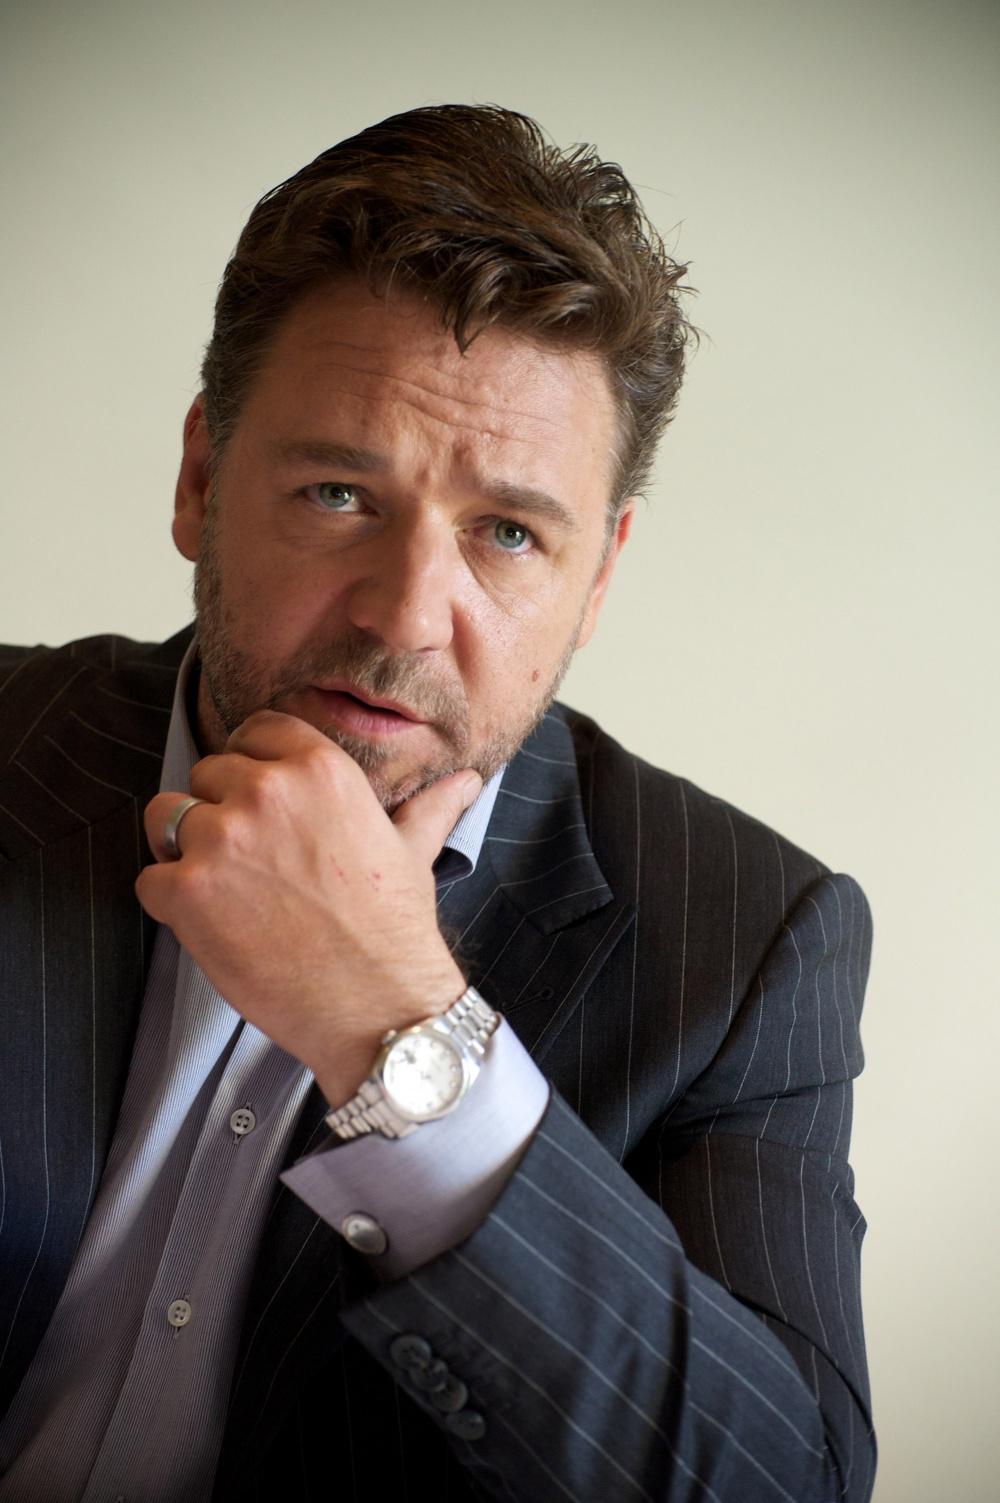 Photo №3957 Russell Crowe.